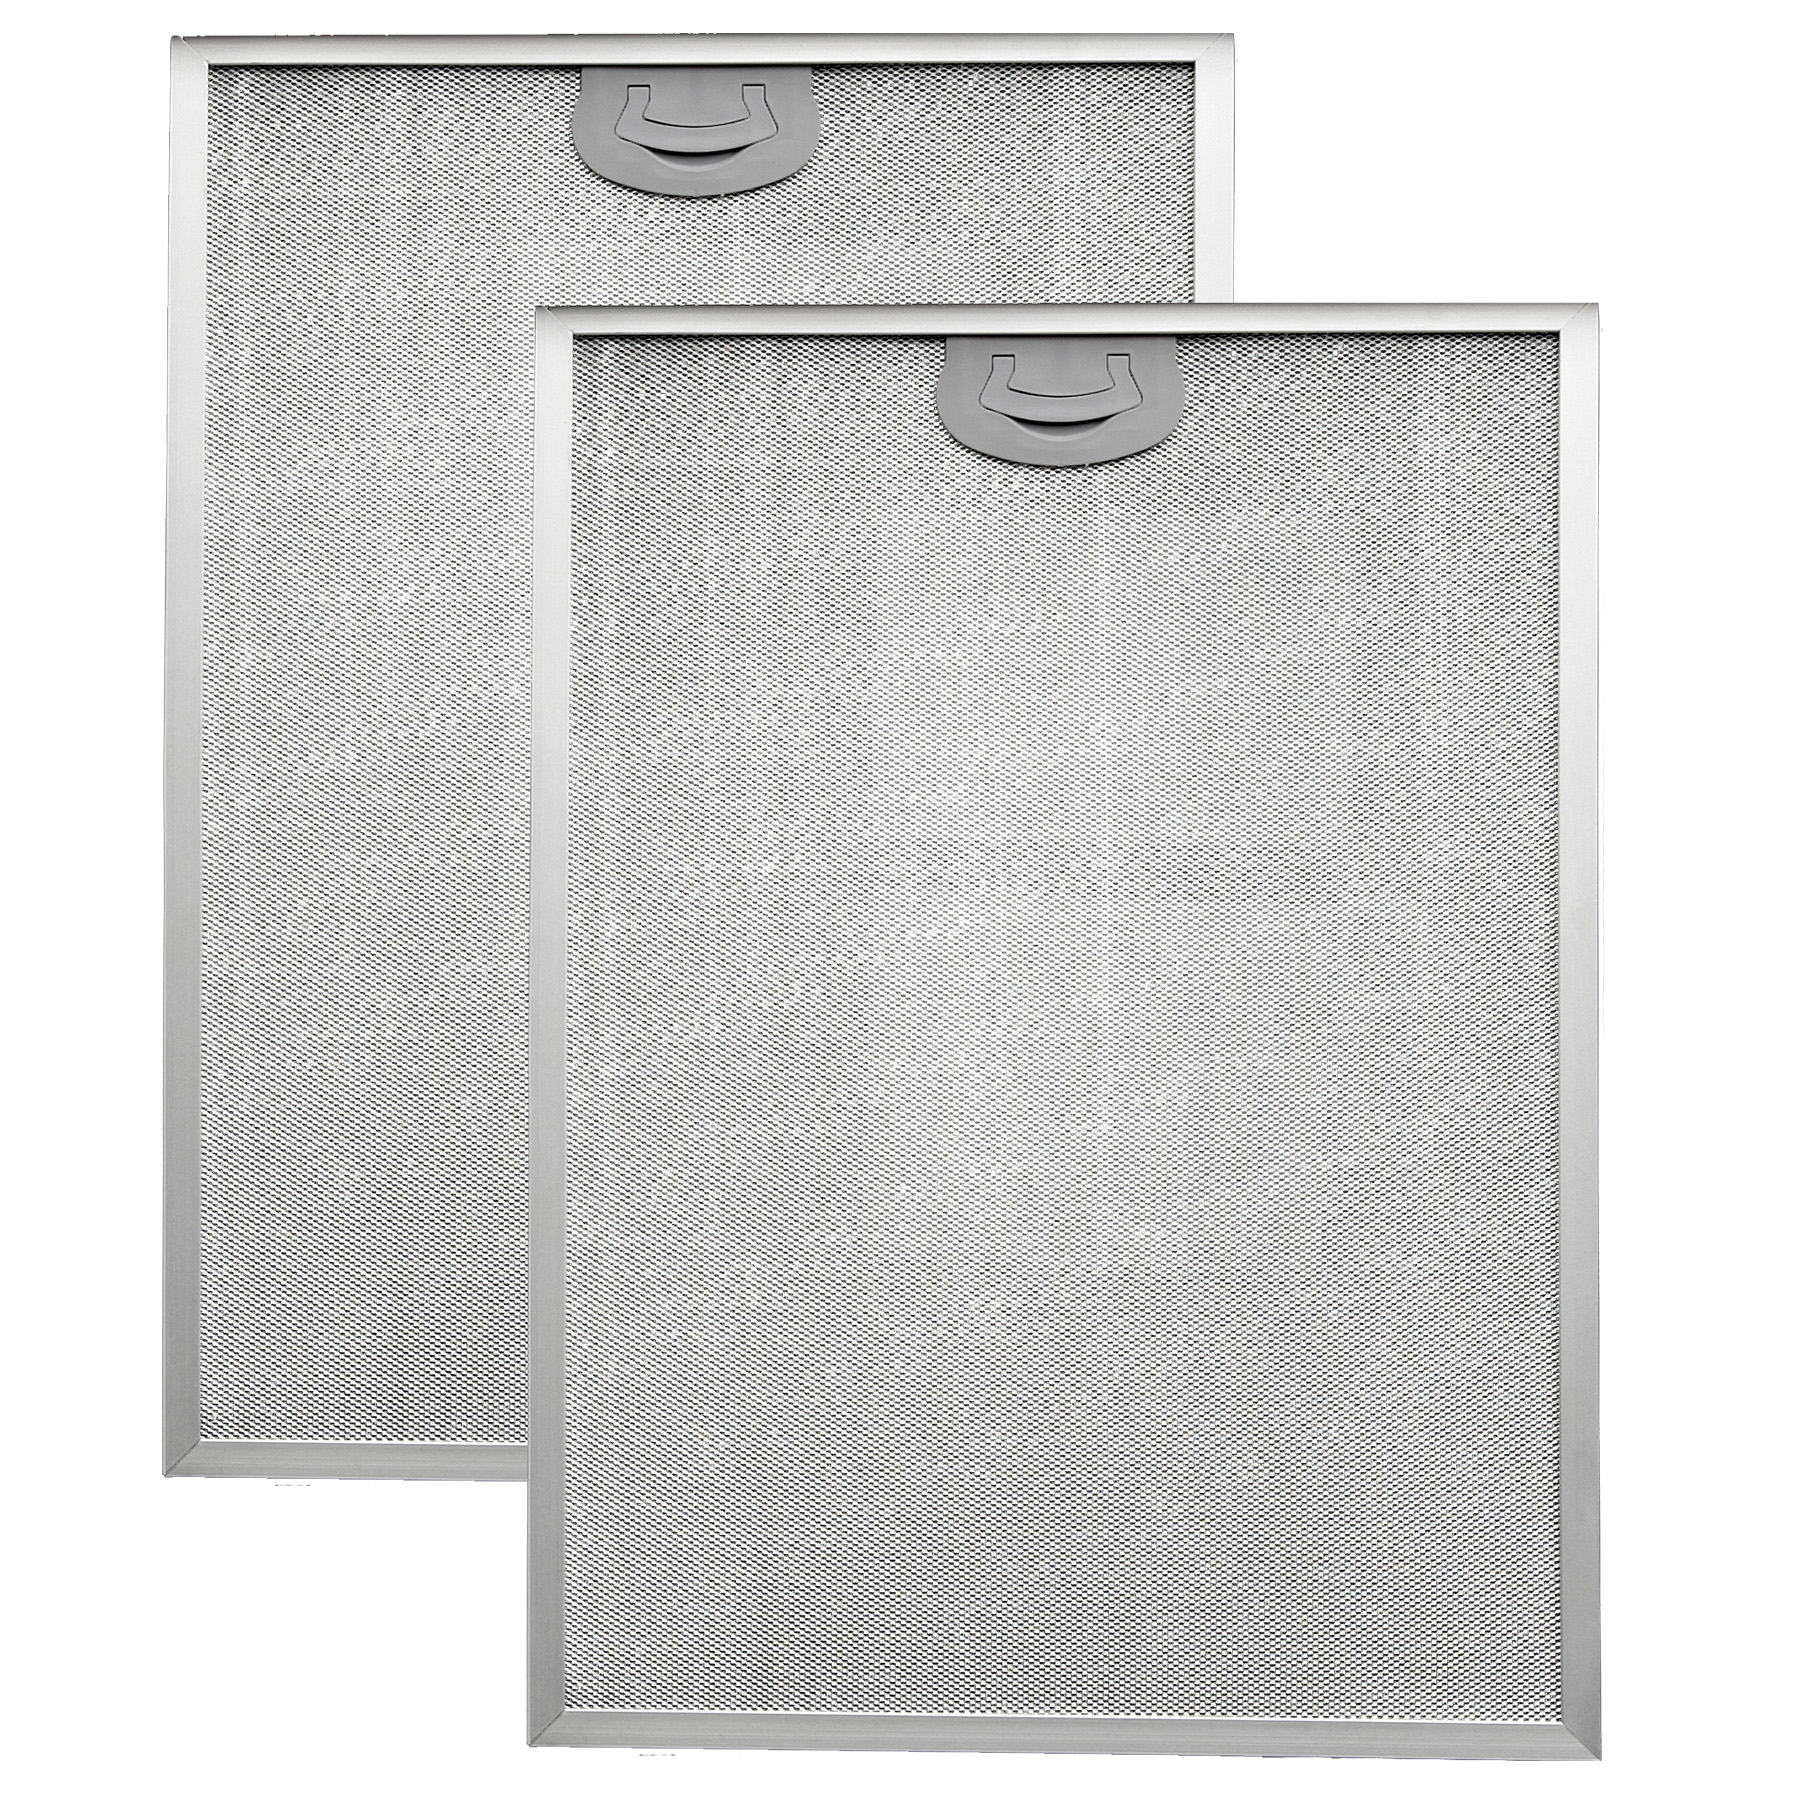 2-Pack Broan BPS2FA30 Aluminum Replacement Filters for 30-Inch QS2 and WS2 Range Hoods 